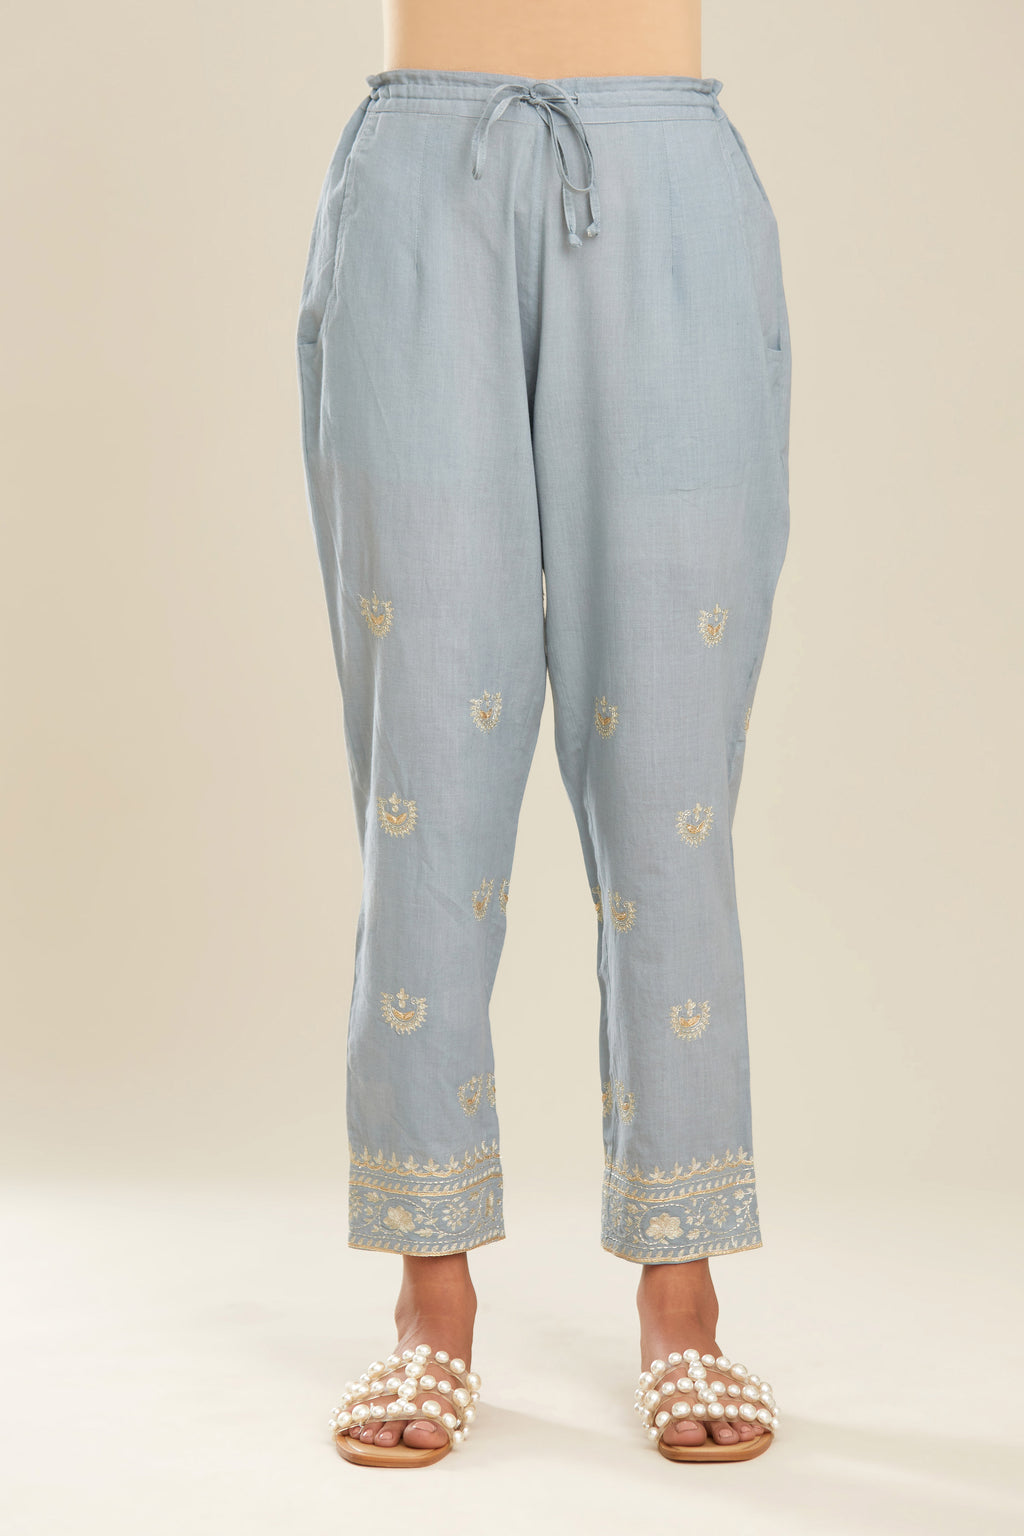 Powder blue cotton narrow pants with gold gota and zari embroidery